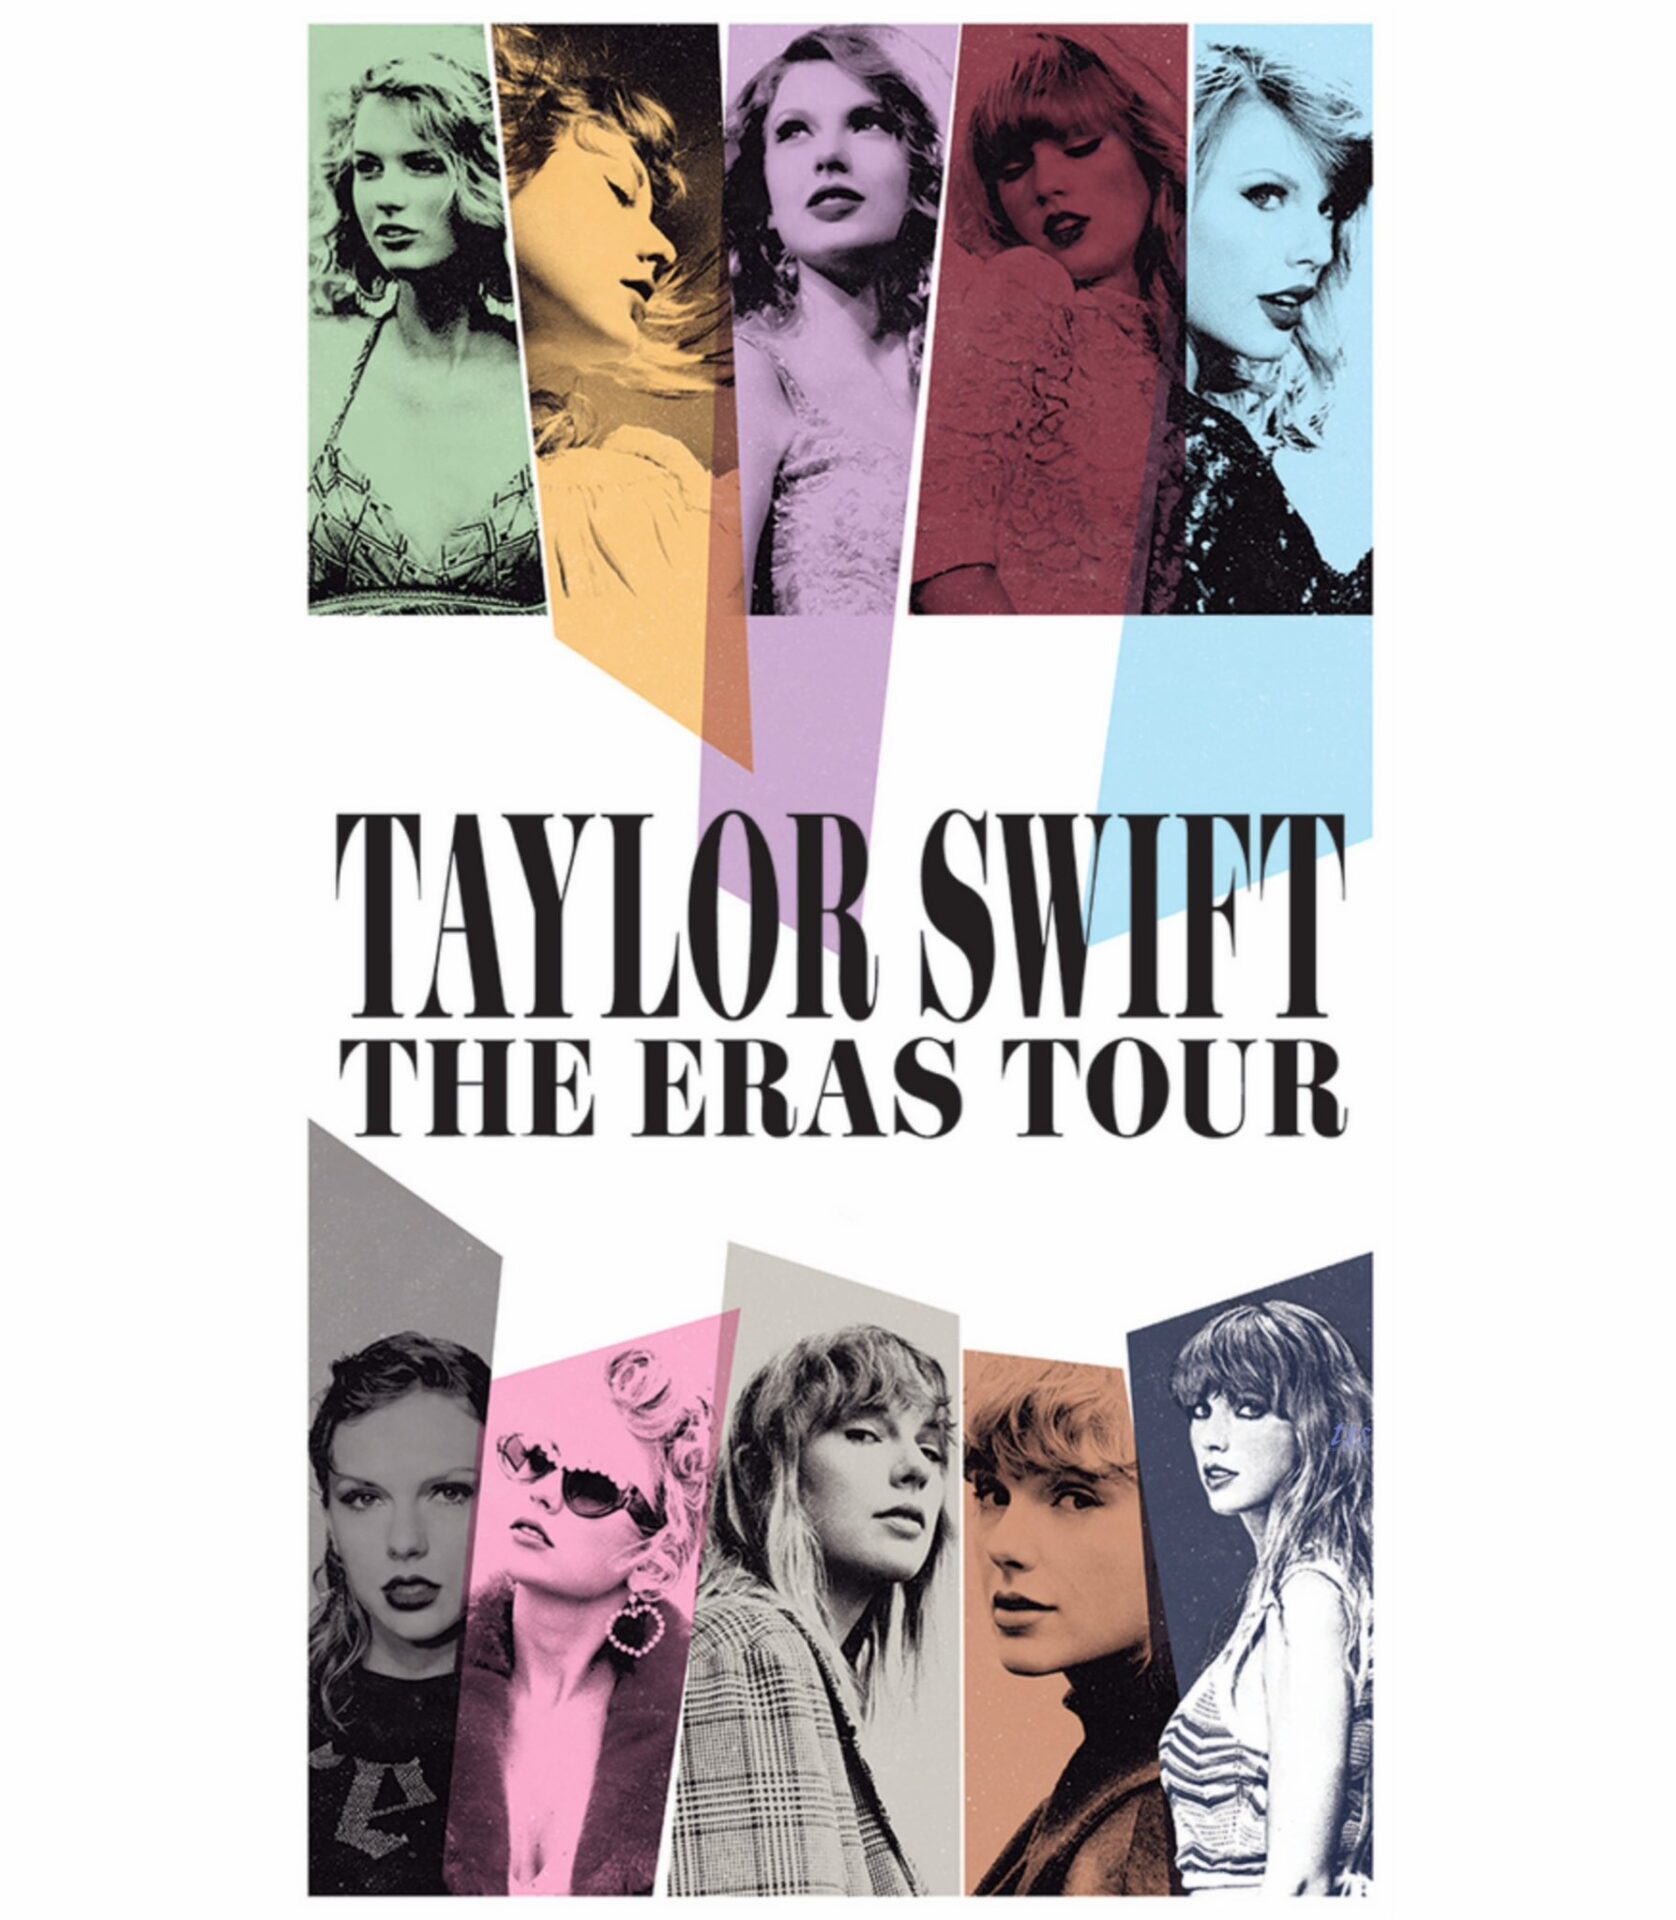 Analyzing the Economic Impact and Taxation of the Taylor Swift Eras Tour Across the United States